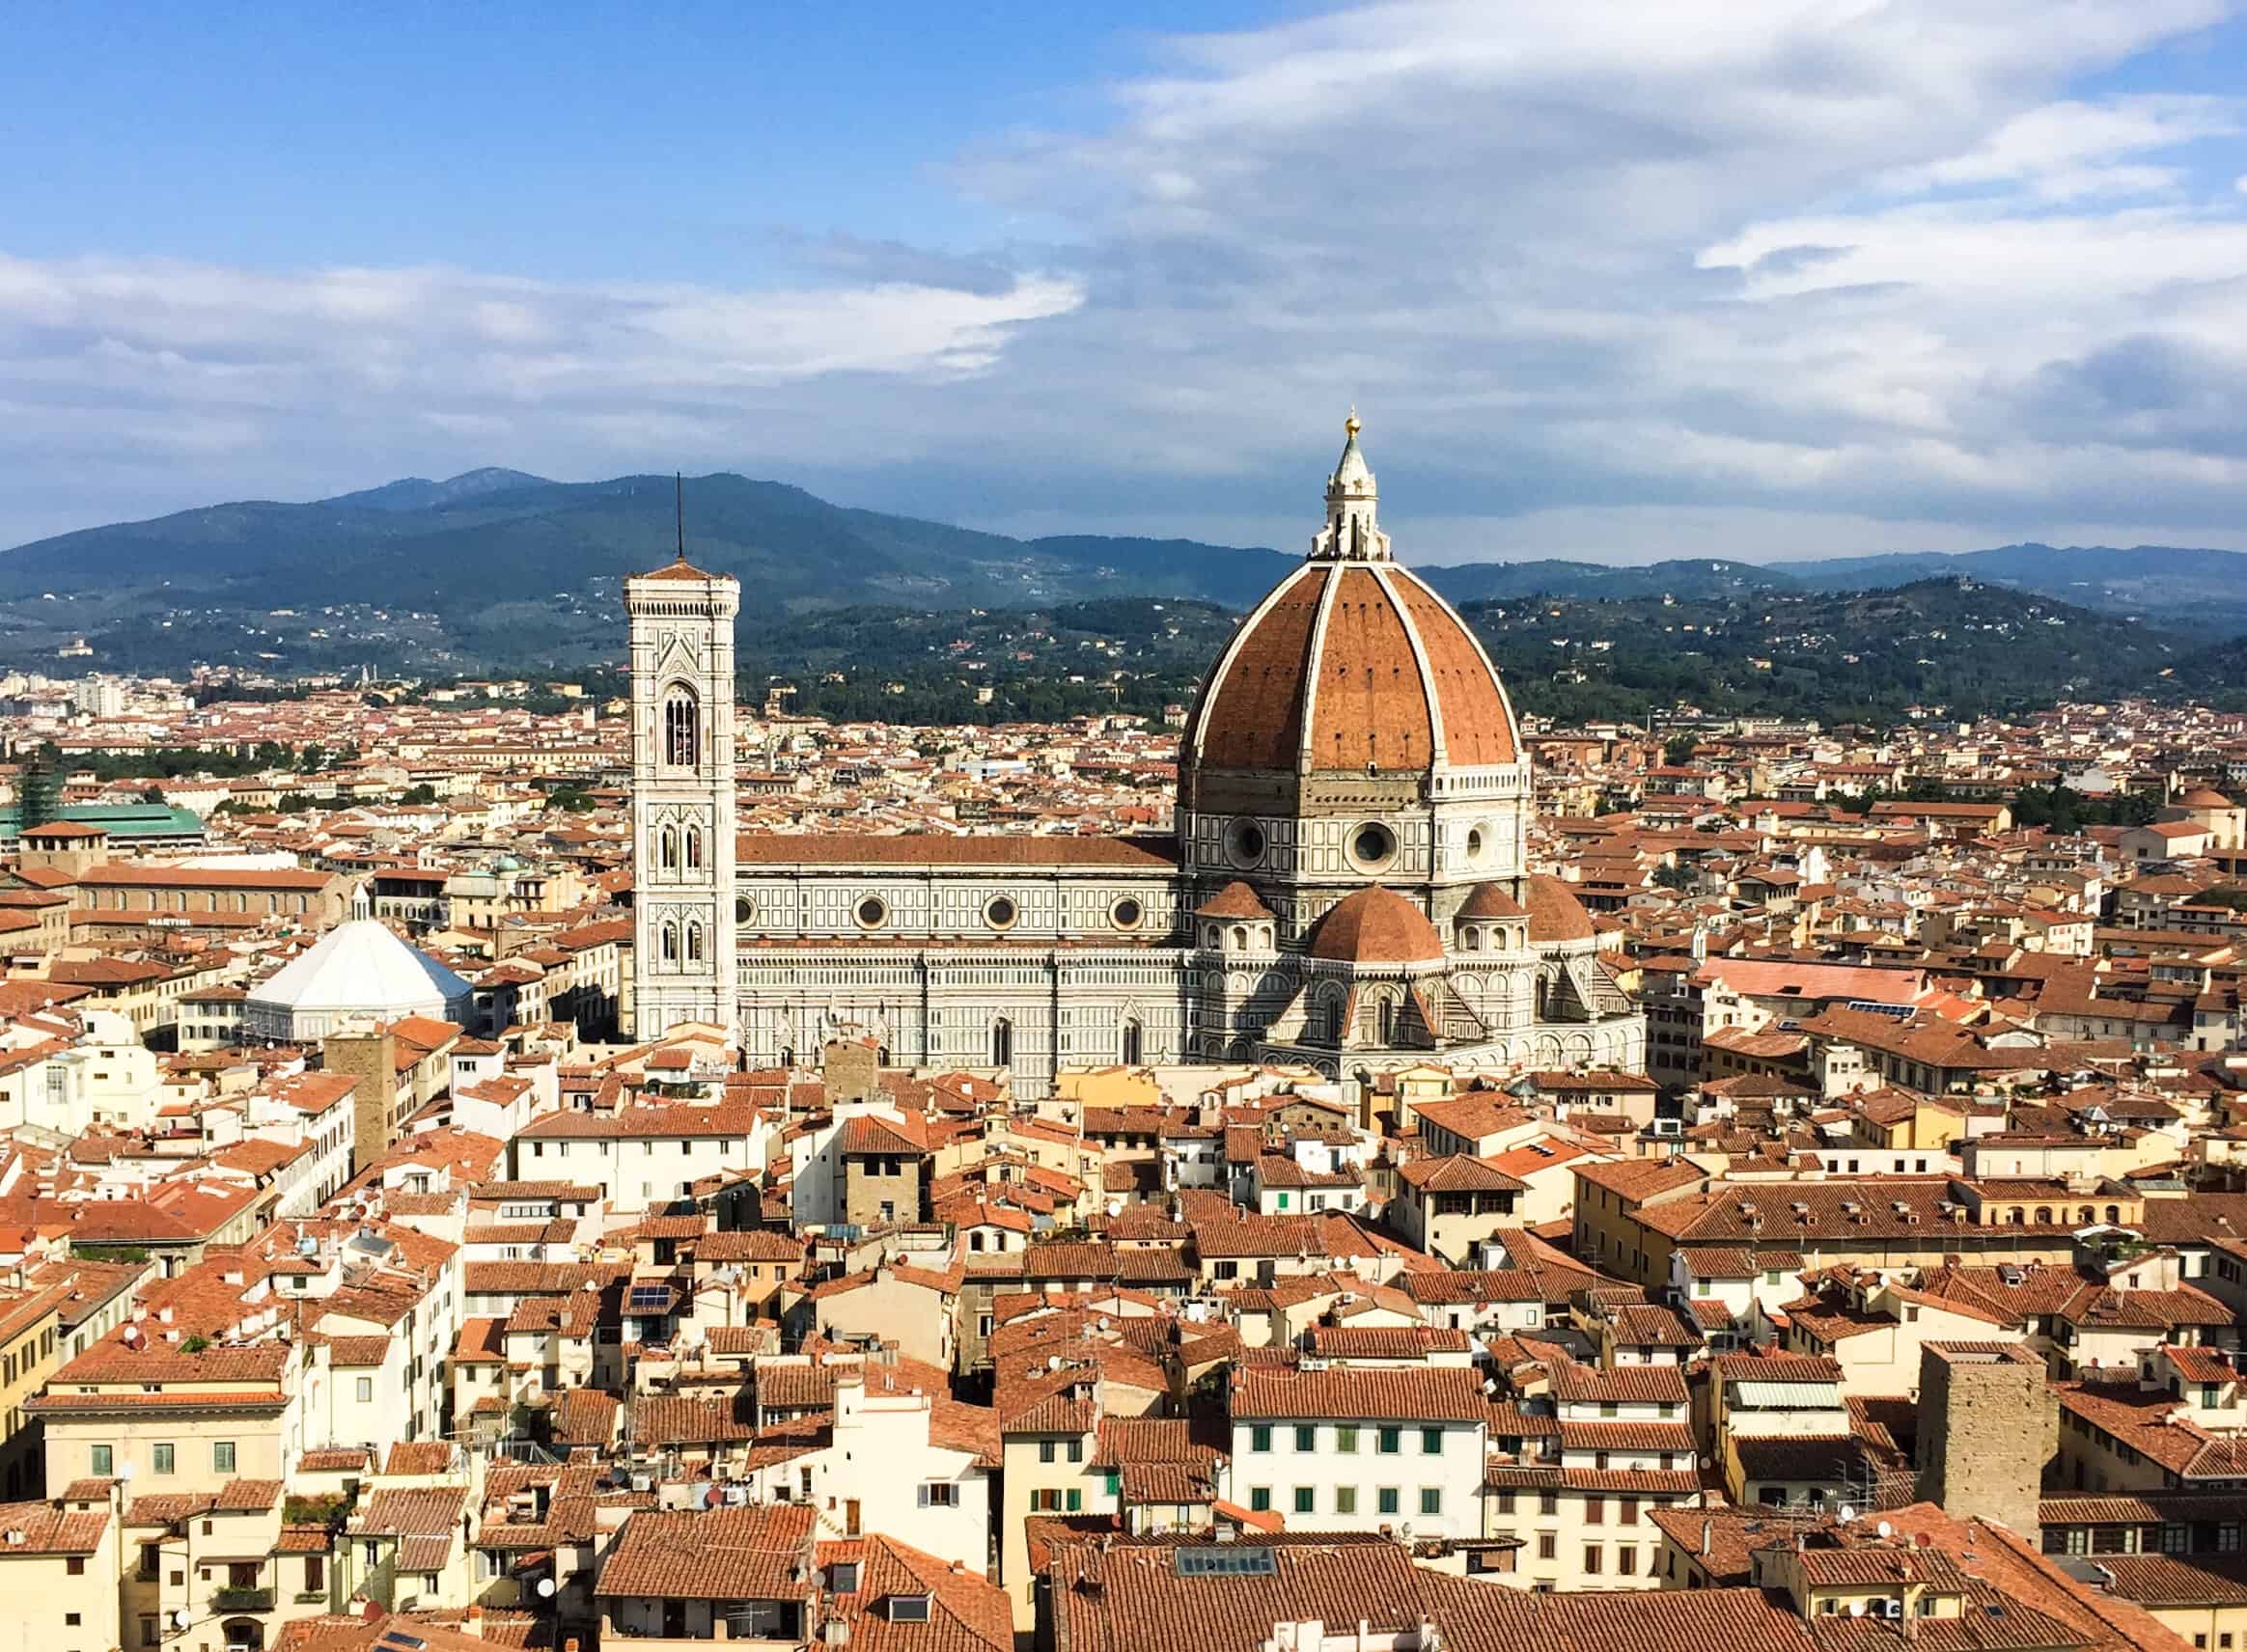 Aerial view of the red tile roofs and Duomo in Florence Italy